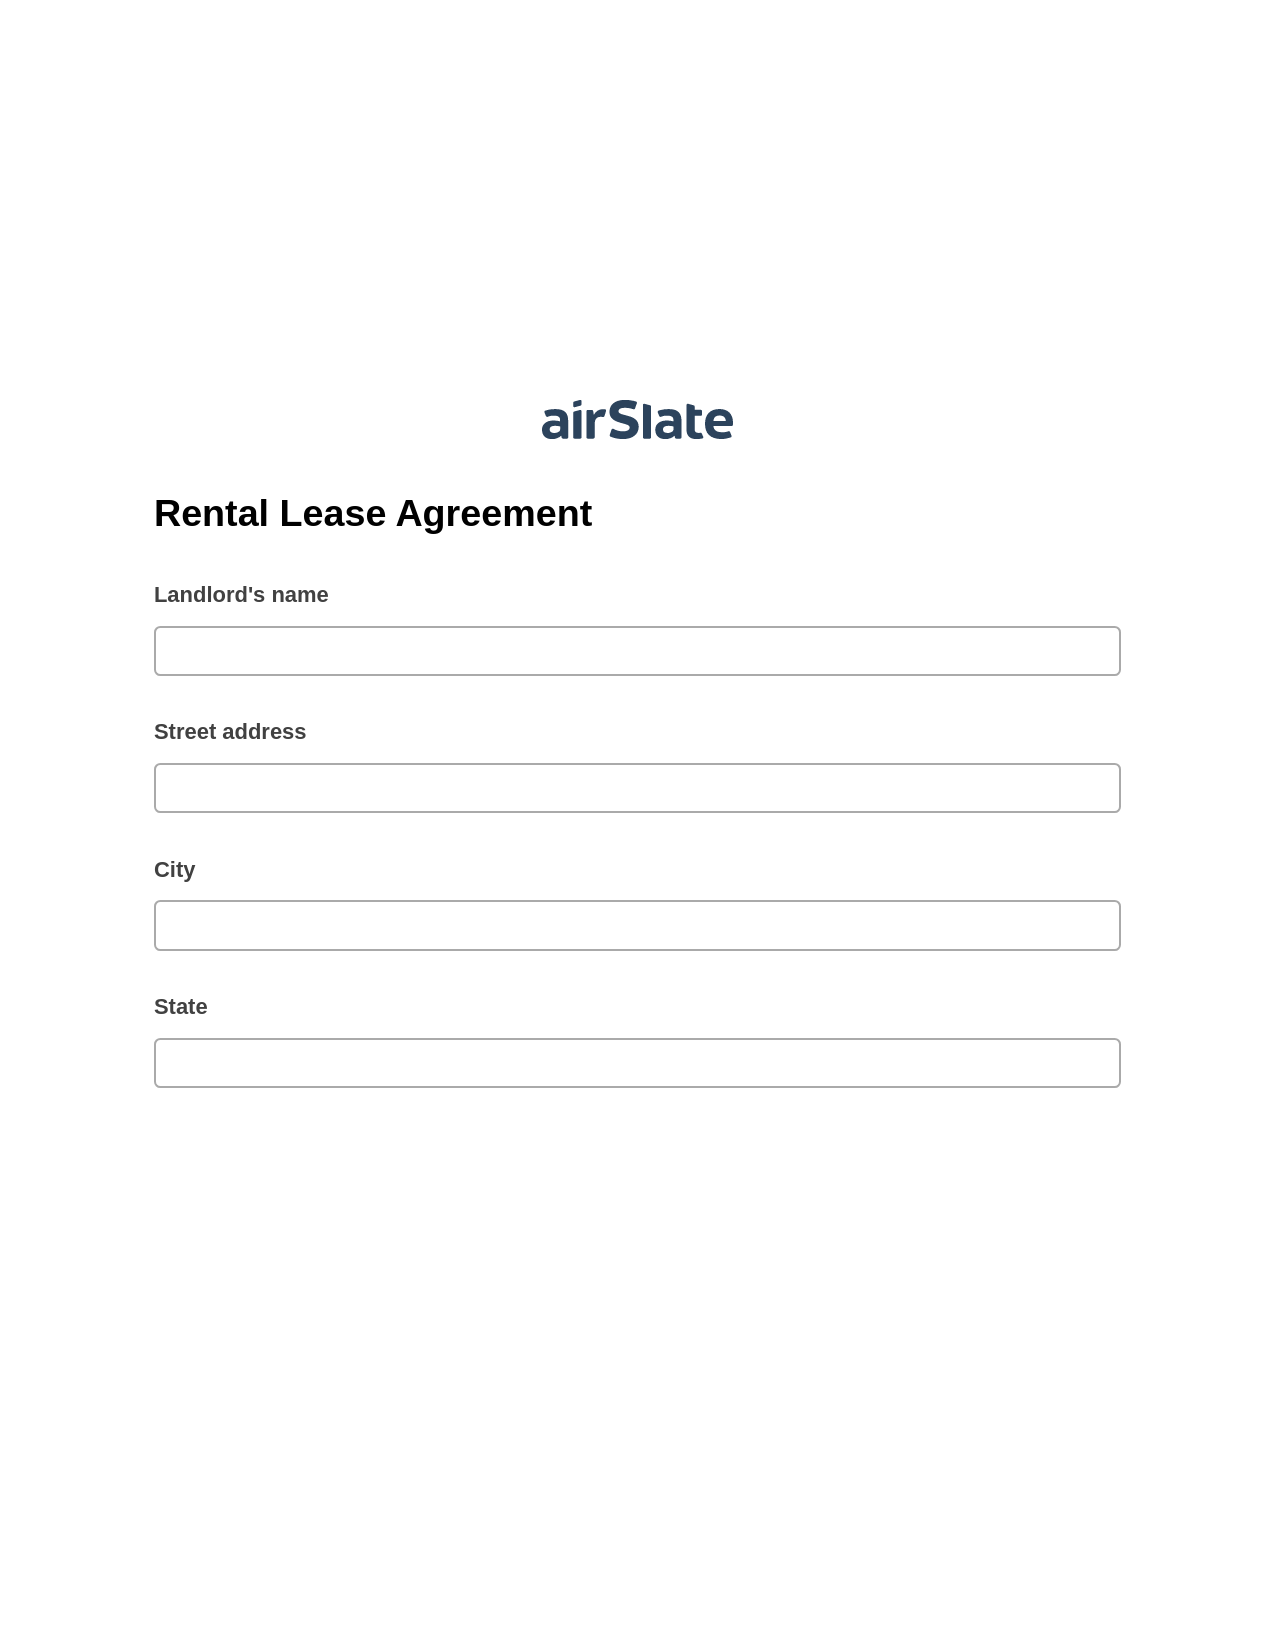 Rental Lease Agreement Pre-fill from Google Sheet Dropdown Options Bot, In-person Signing Bot, Box Bot